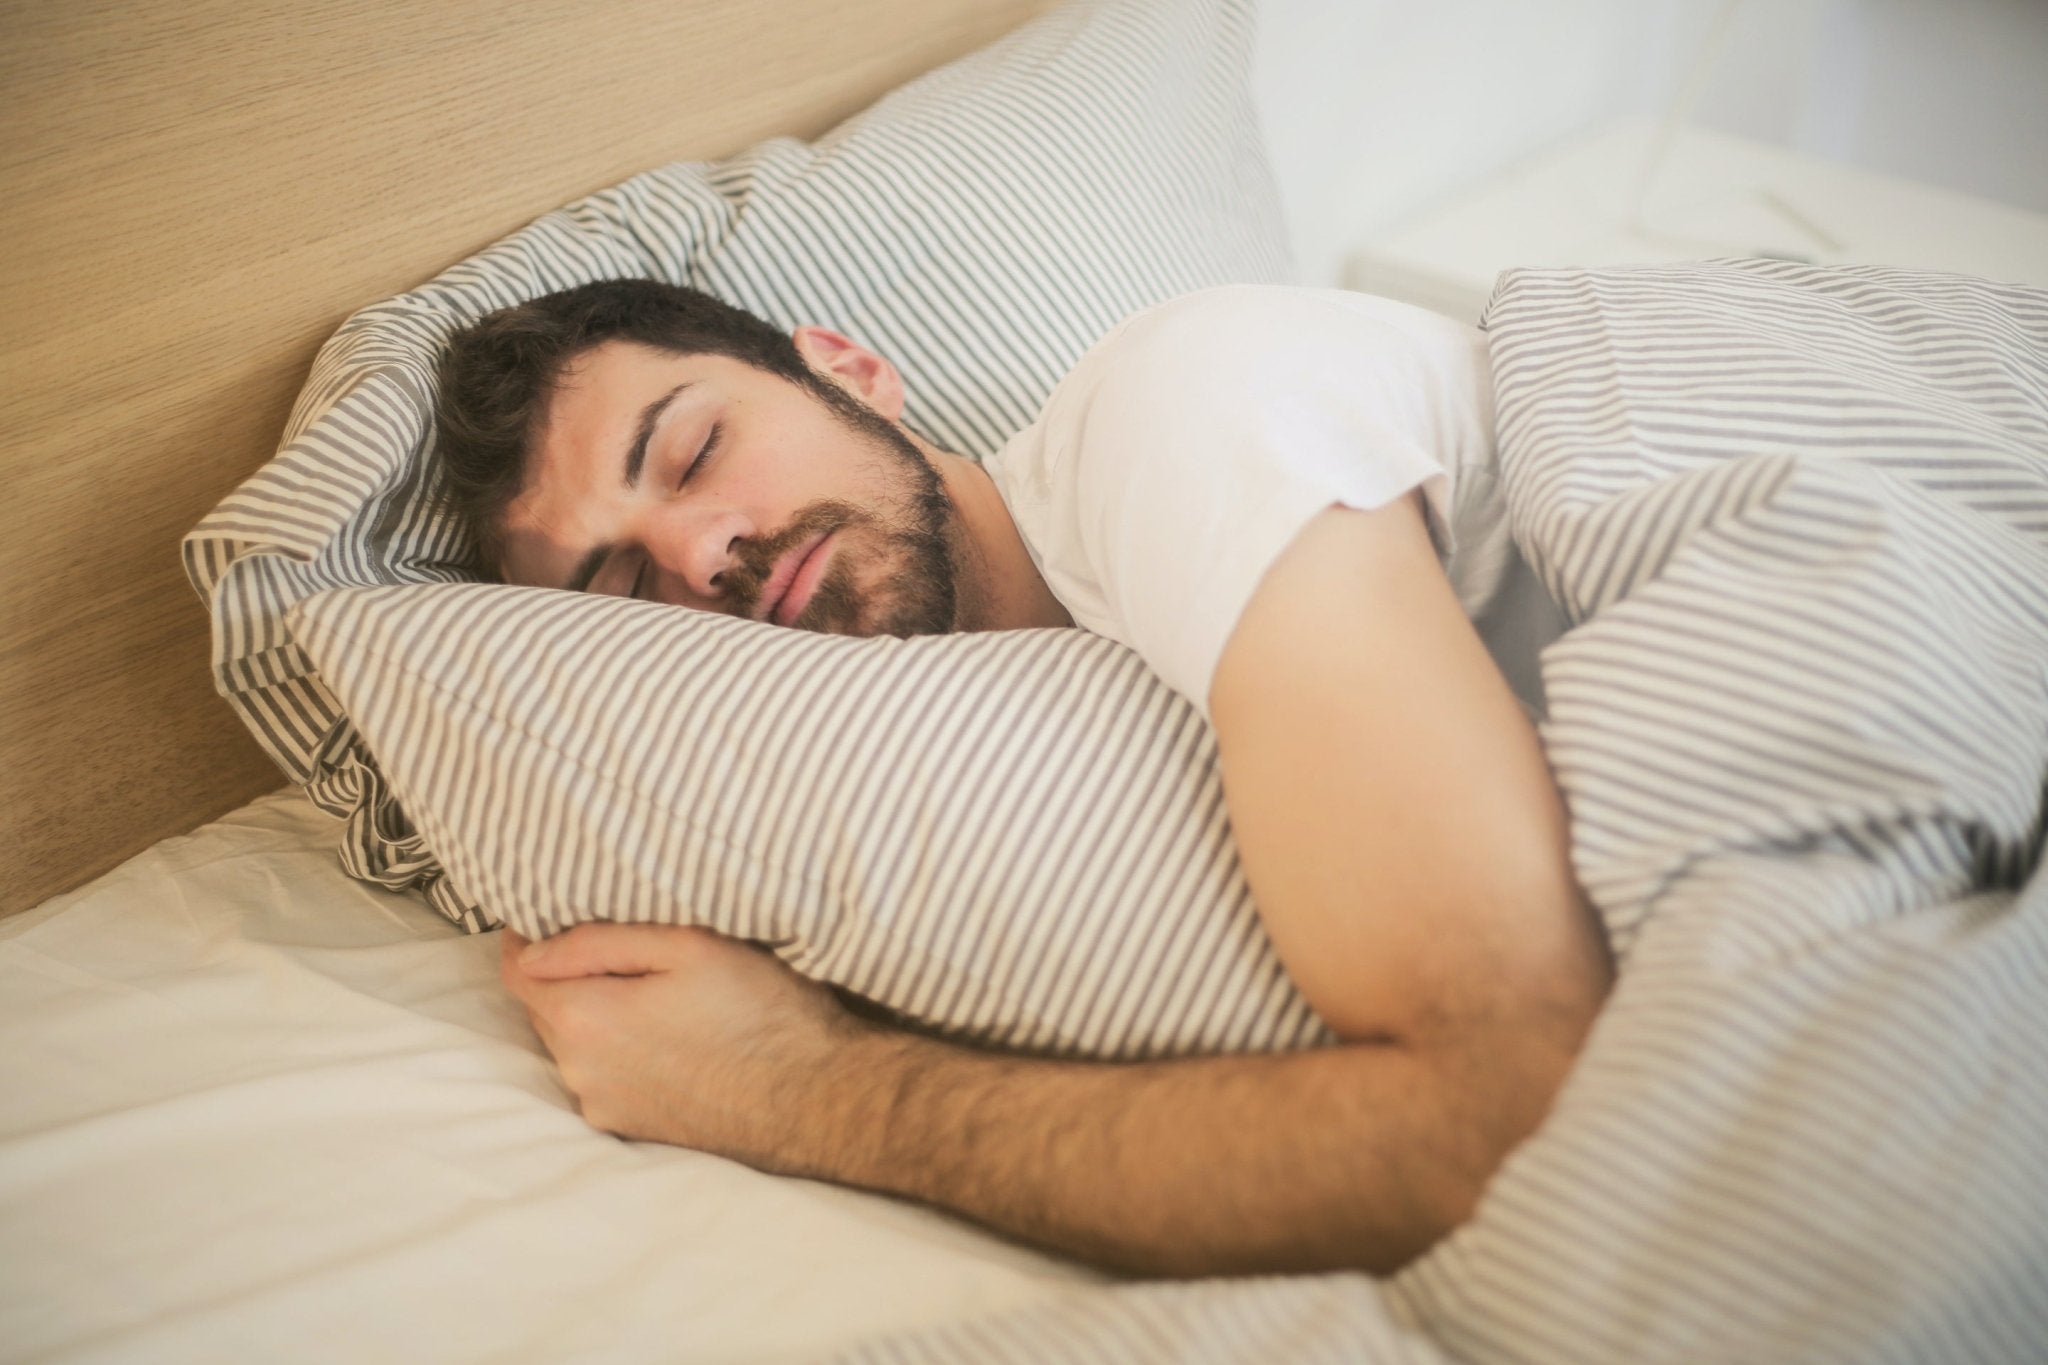 Why Is Sleeping Crucial For Building Muscle? - MIOFAR